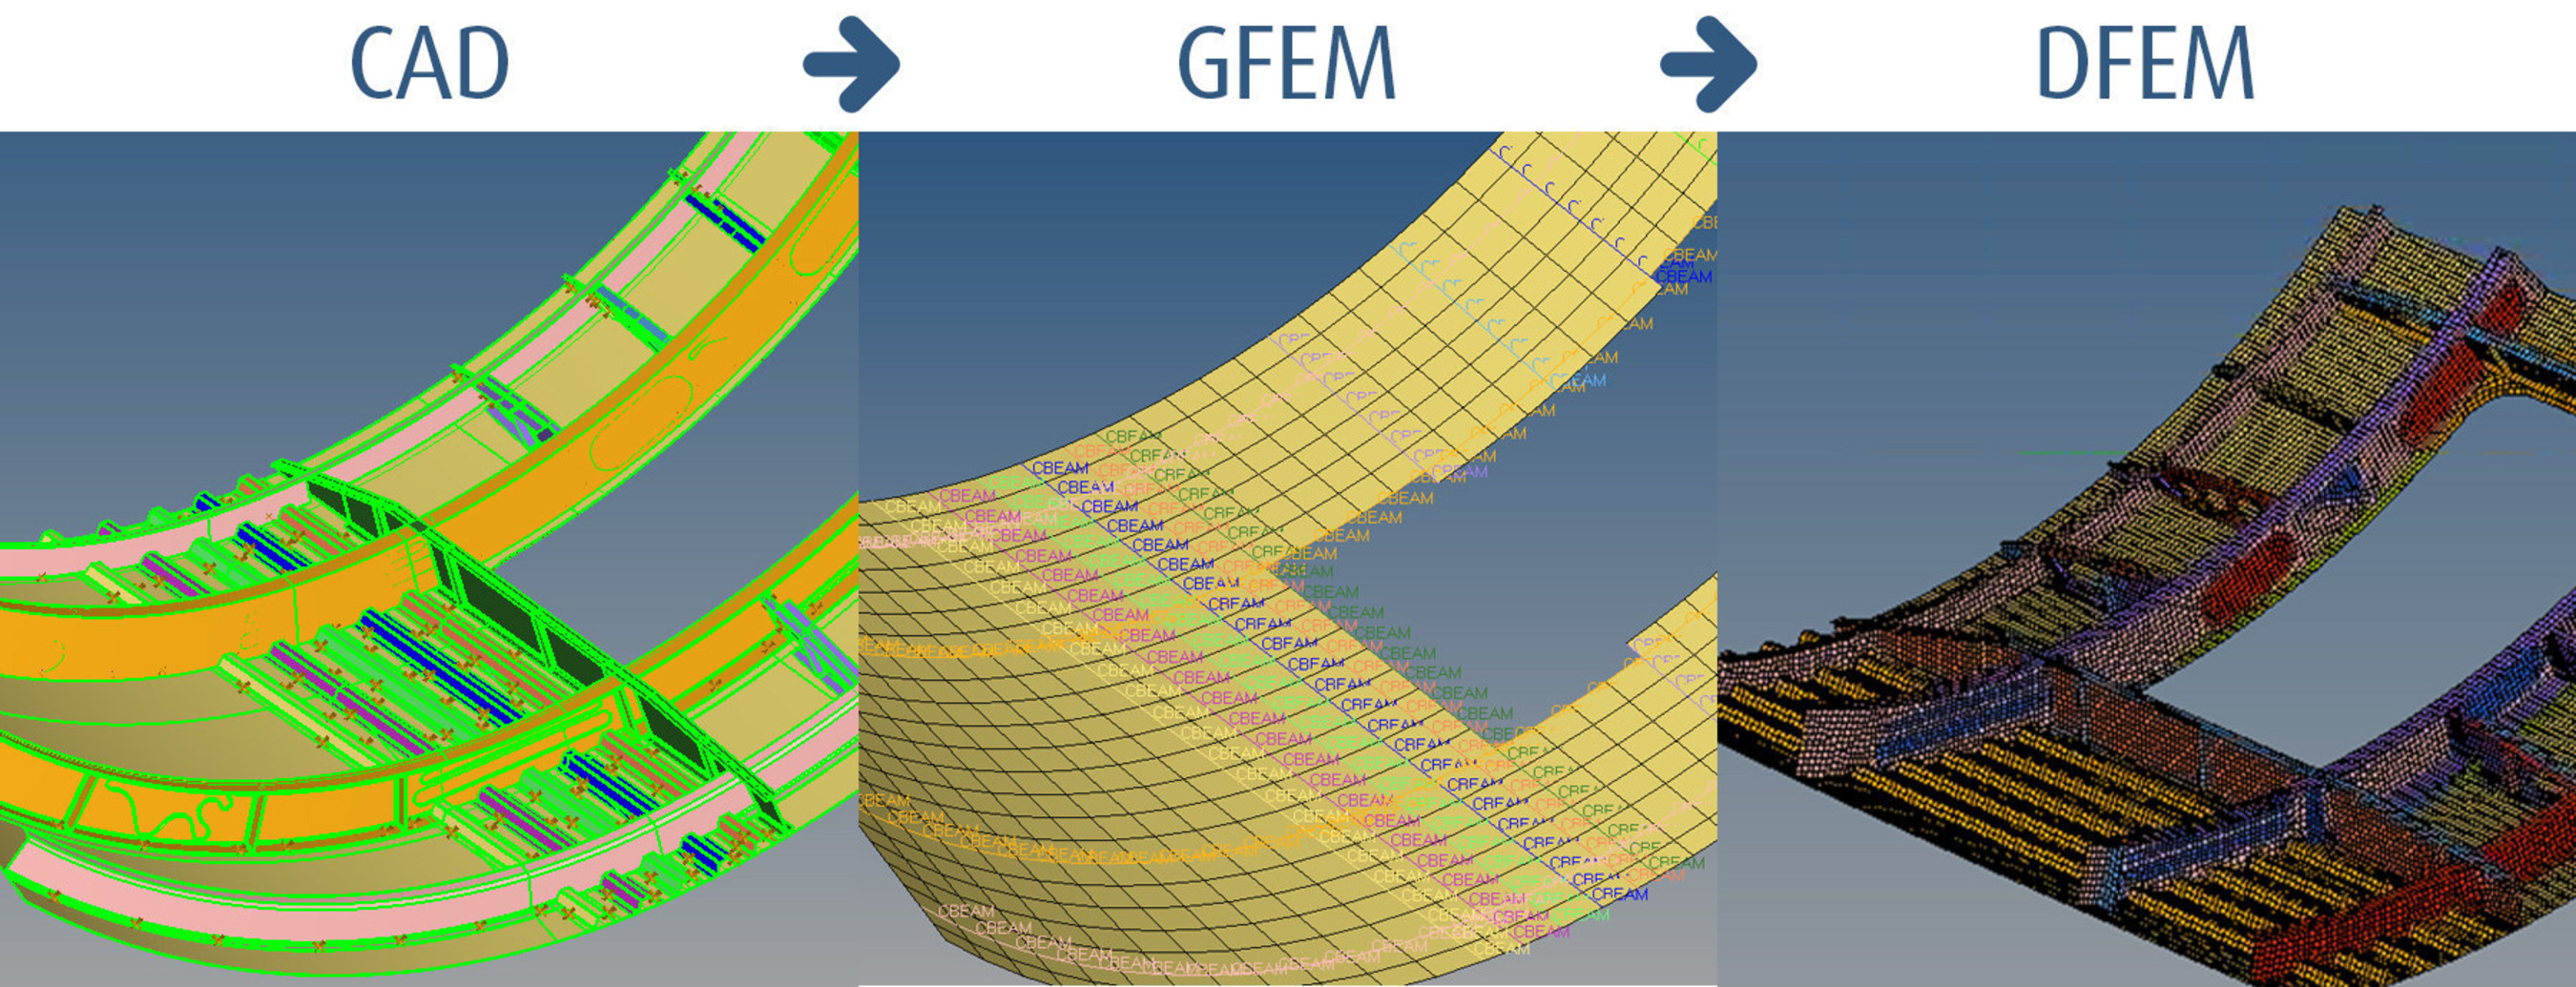 Providing a complete workflow to go from CAD to Global Model (GFEM) to Detailed Model (DFEM)